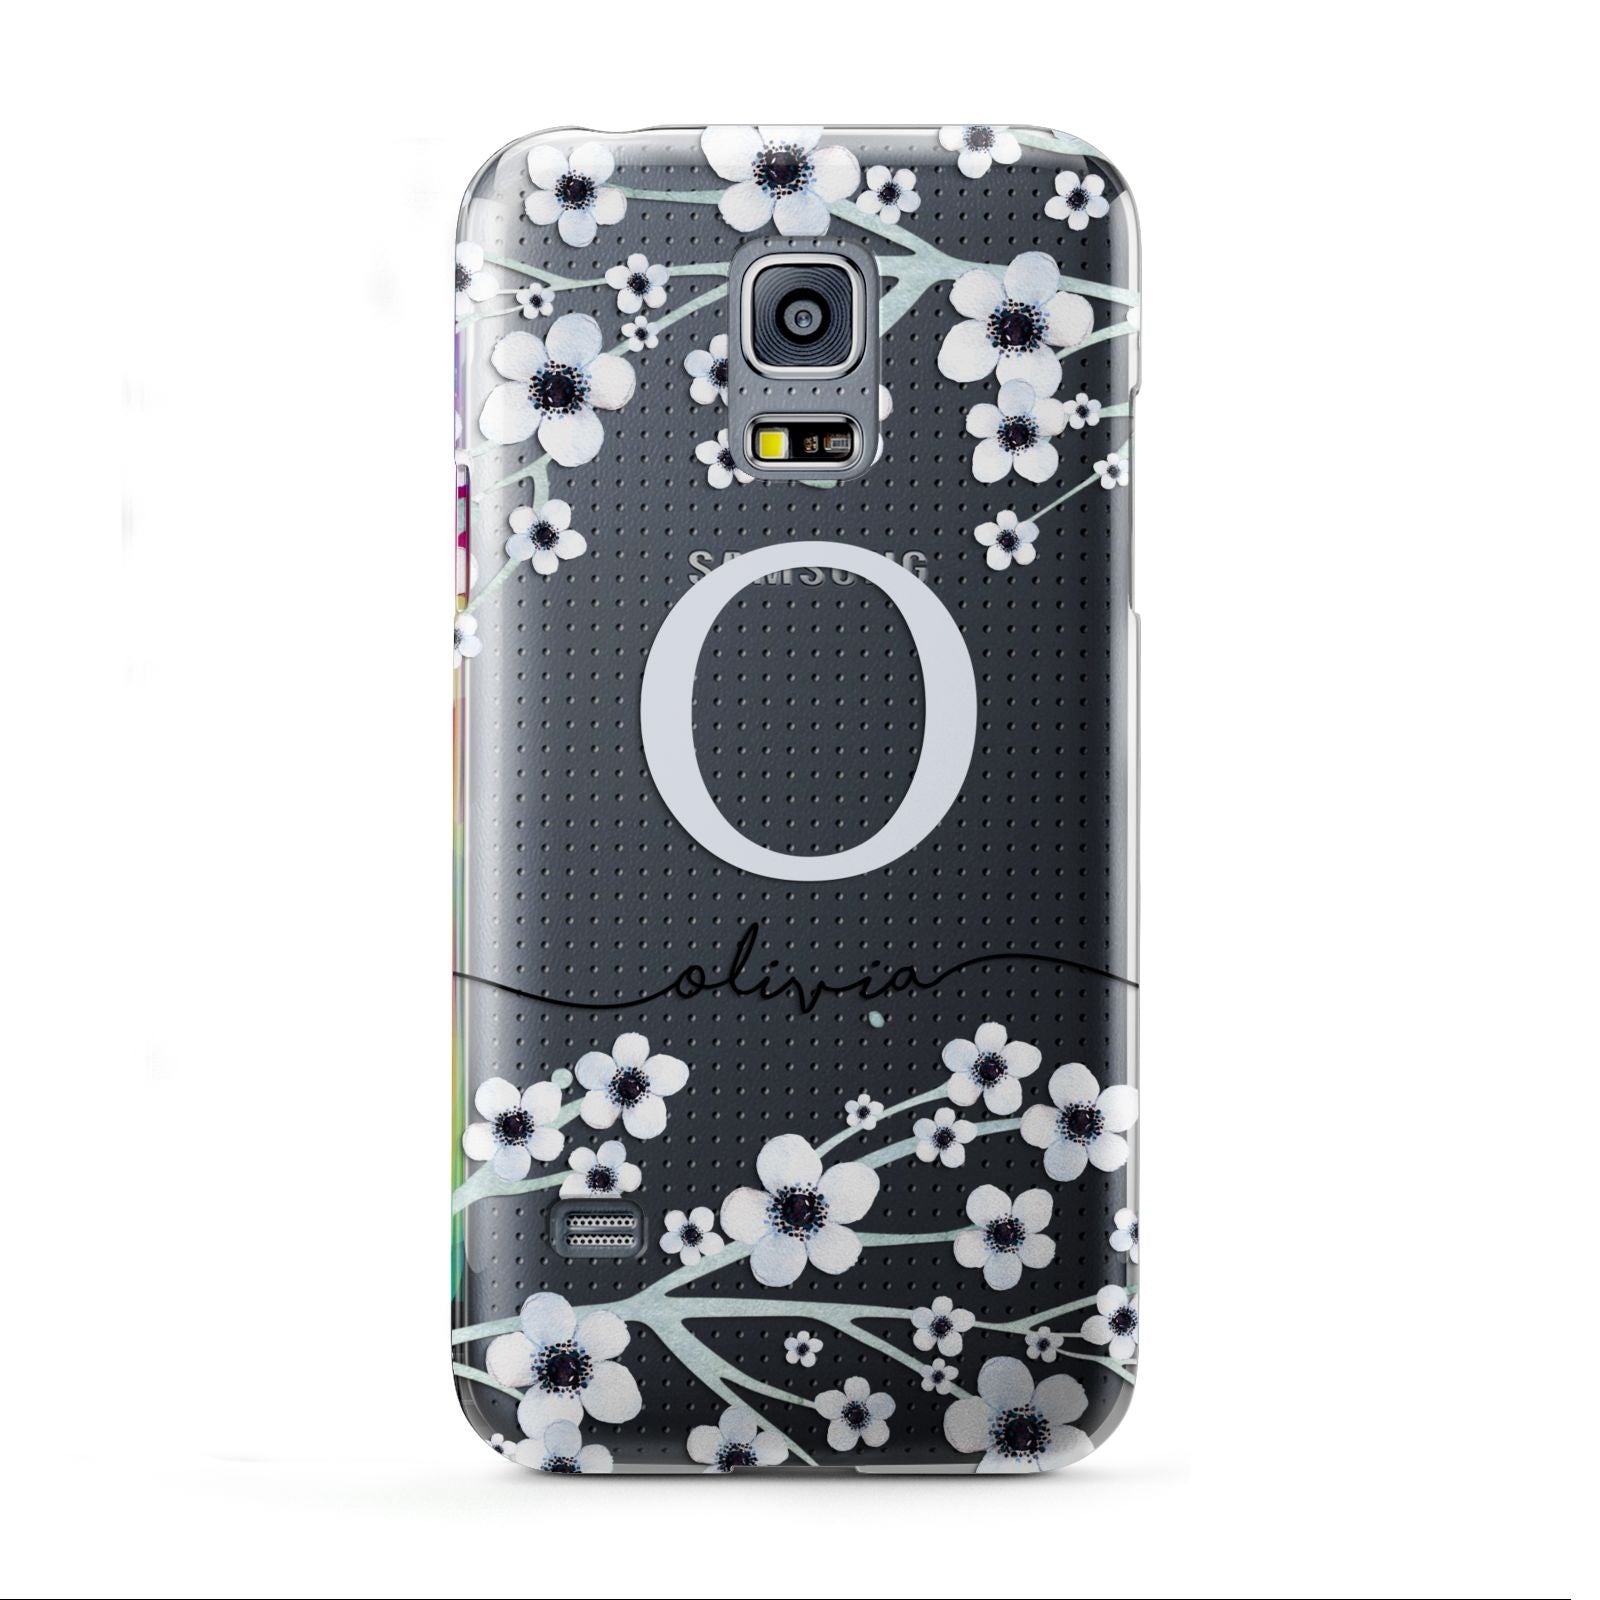 Personalised White Flower Samsung Galaxy S5 Mini Case